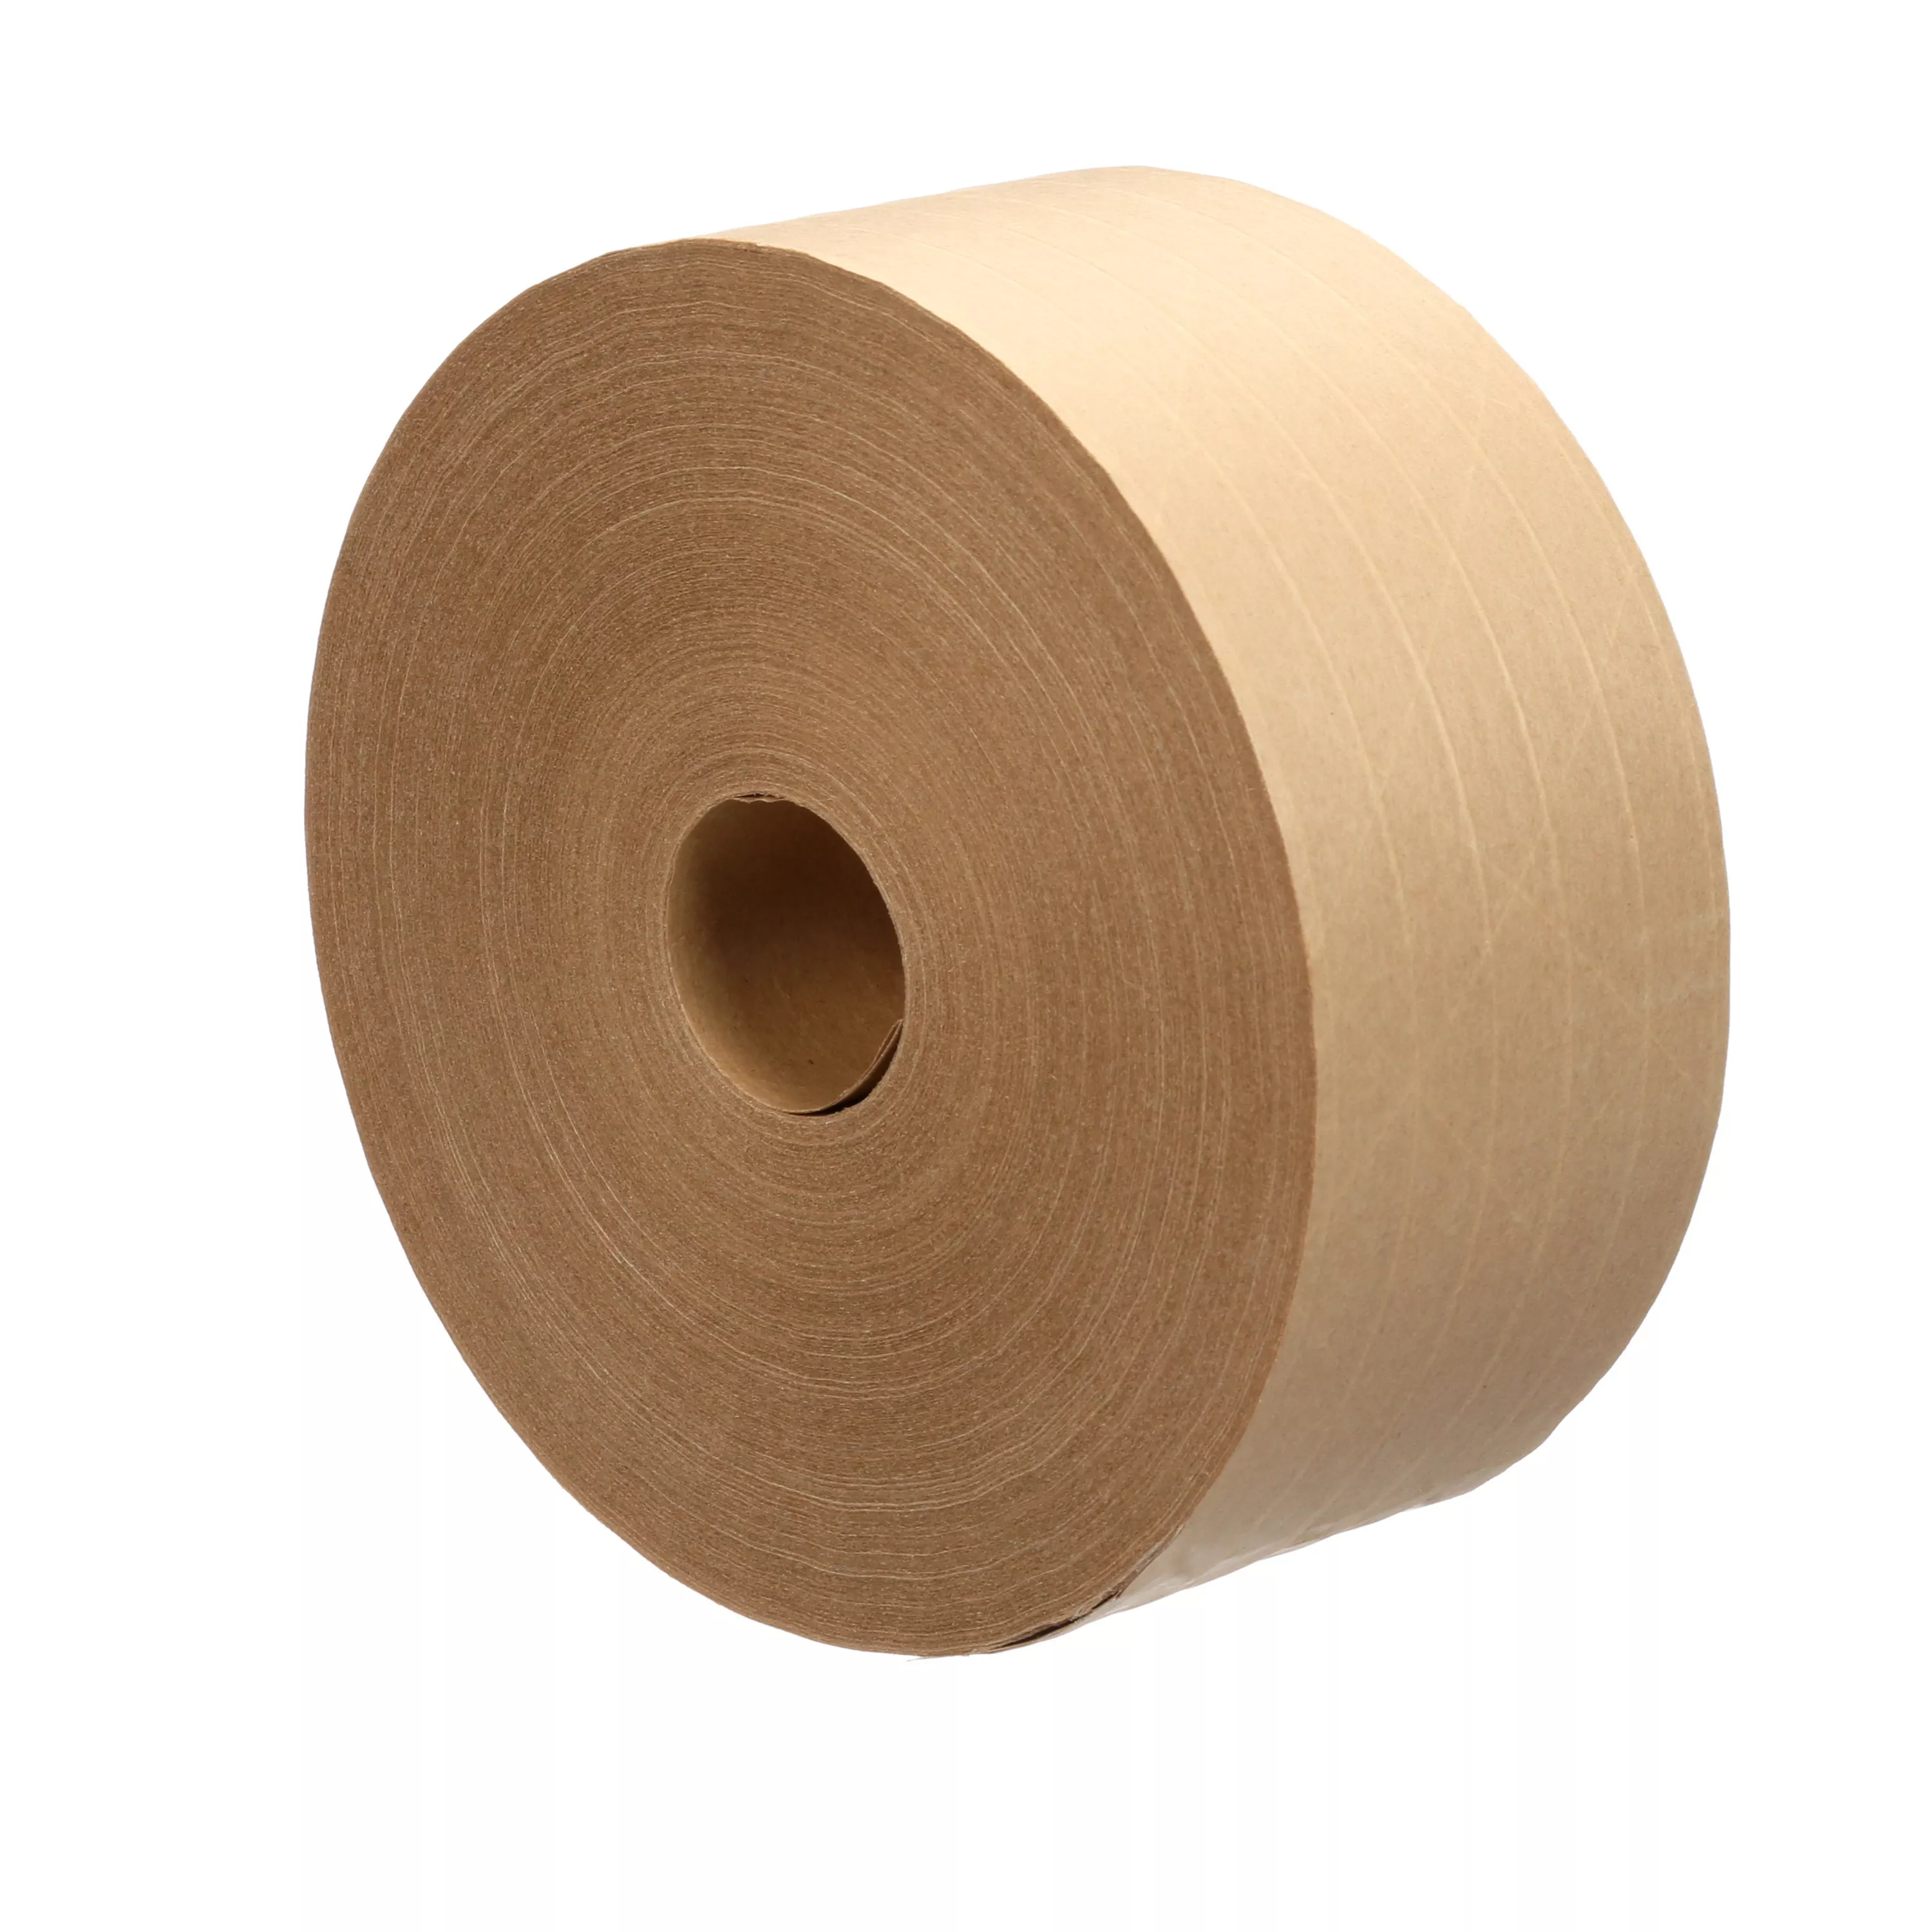 3M™ Water Activated Paper Tape 6146, Natural, Medium Duty Reinforced, 72
mm x 600 ft, 10/Case